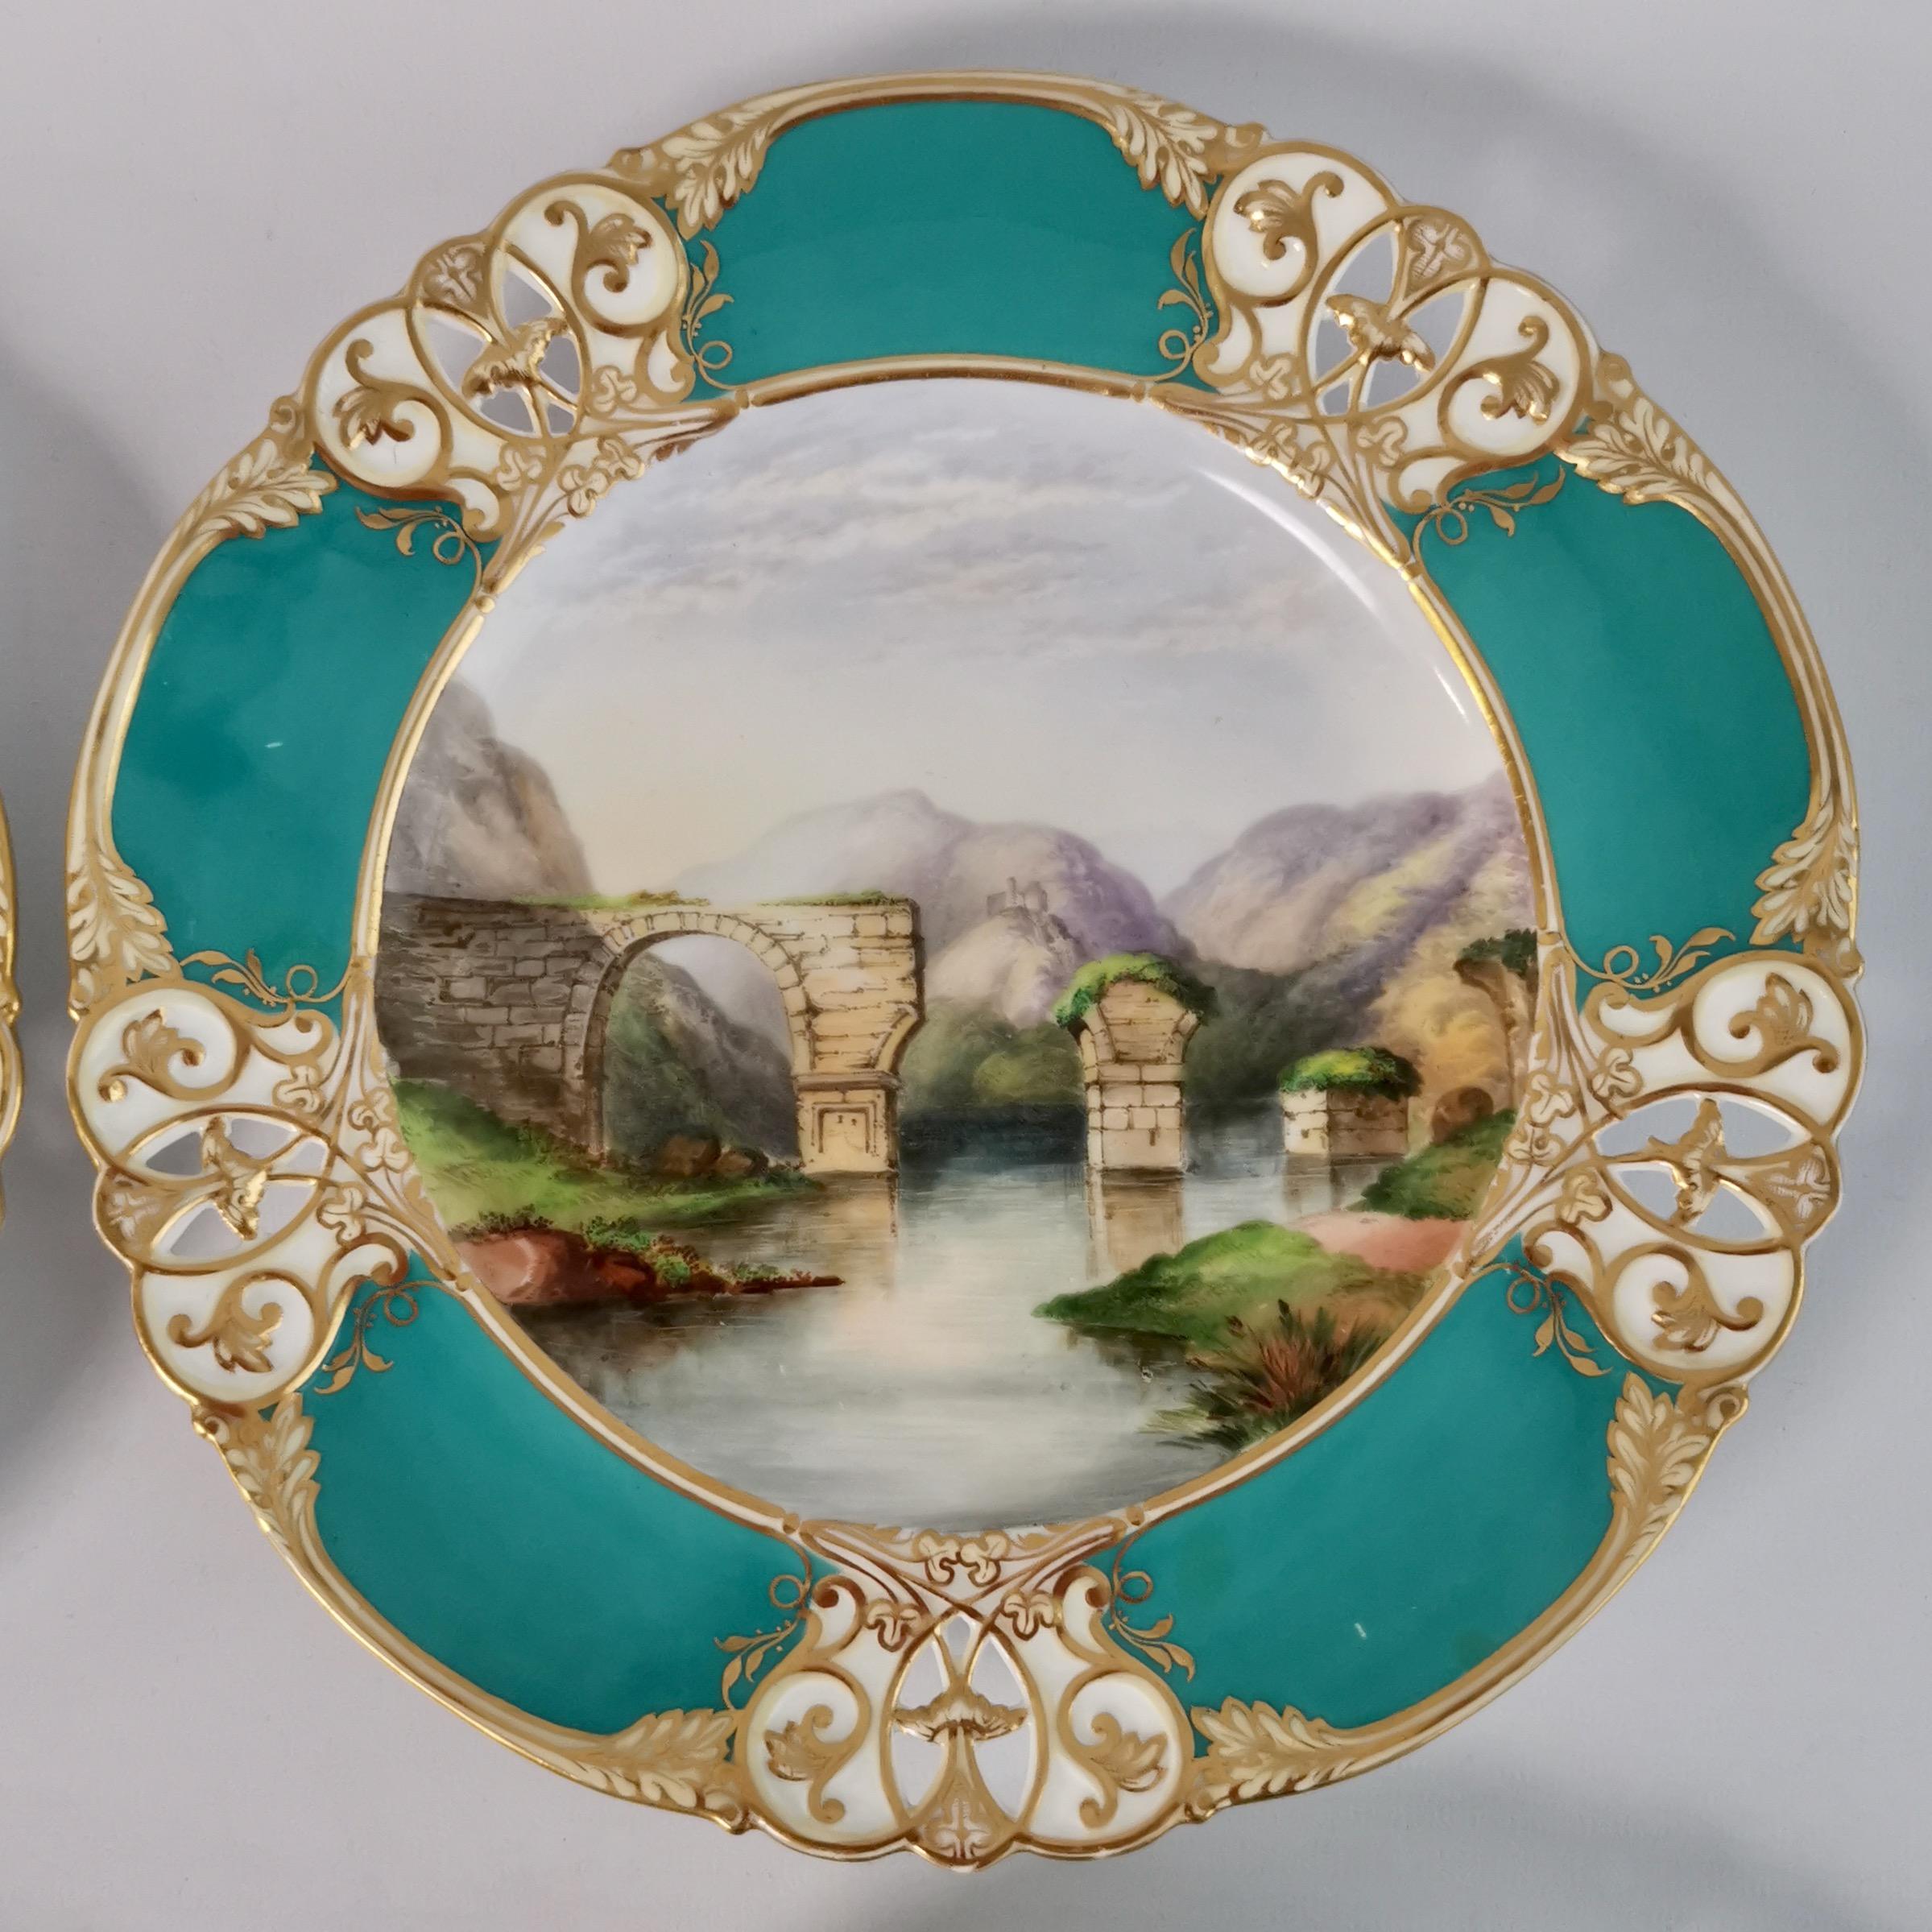 On offer is a beautiful set of four dessert plates made by Royal Worcester around the year 1870. The plates have bright emerald green rims in the 